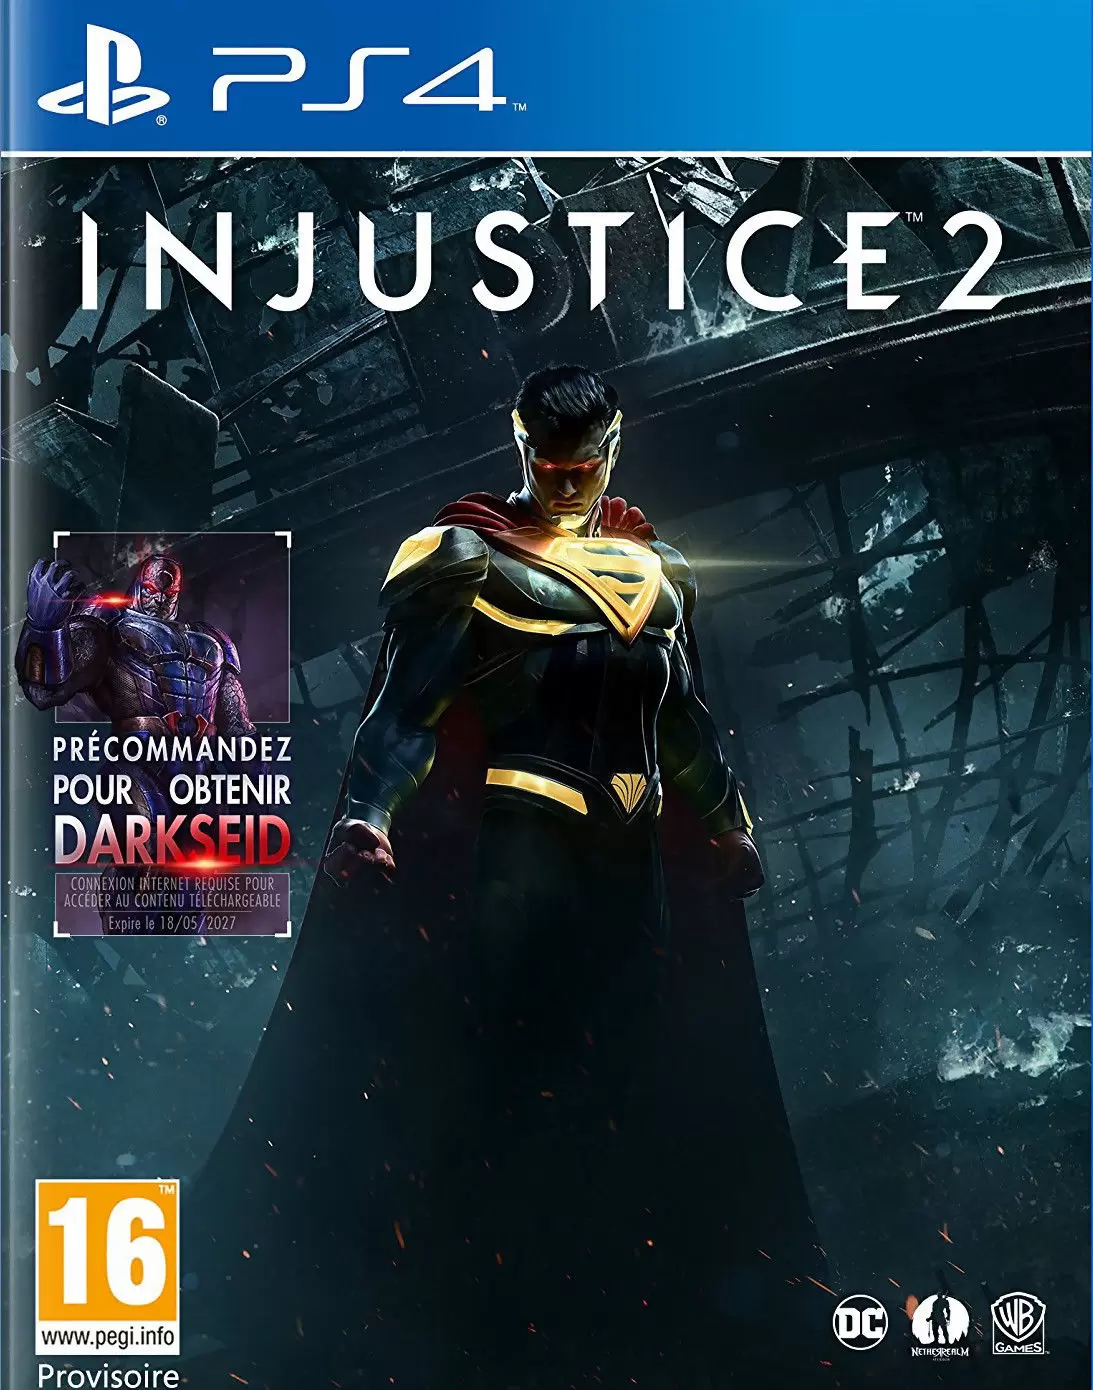 PS4 Games - Injustice 2